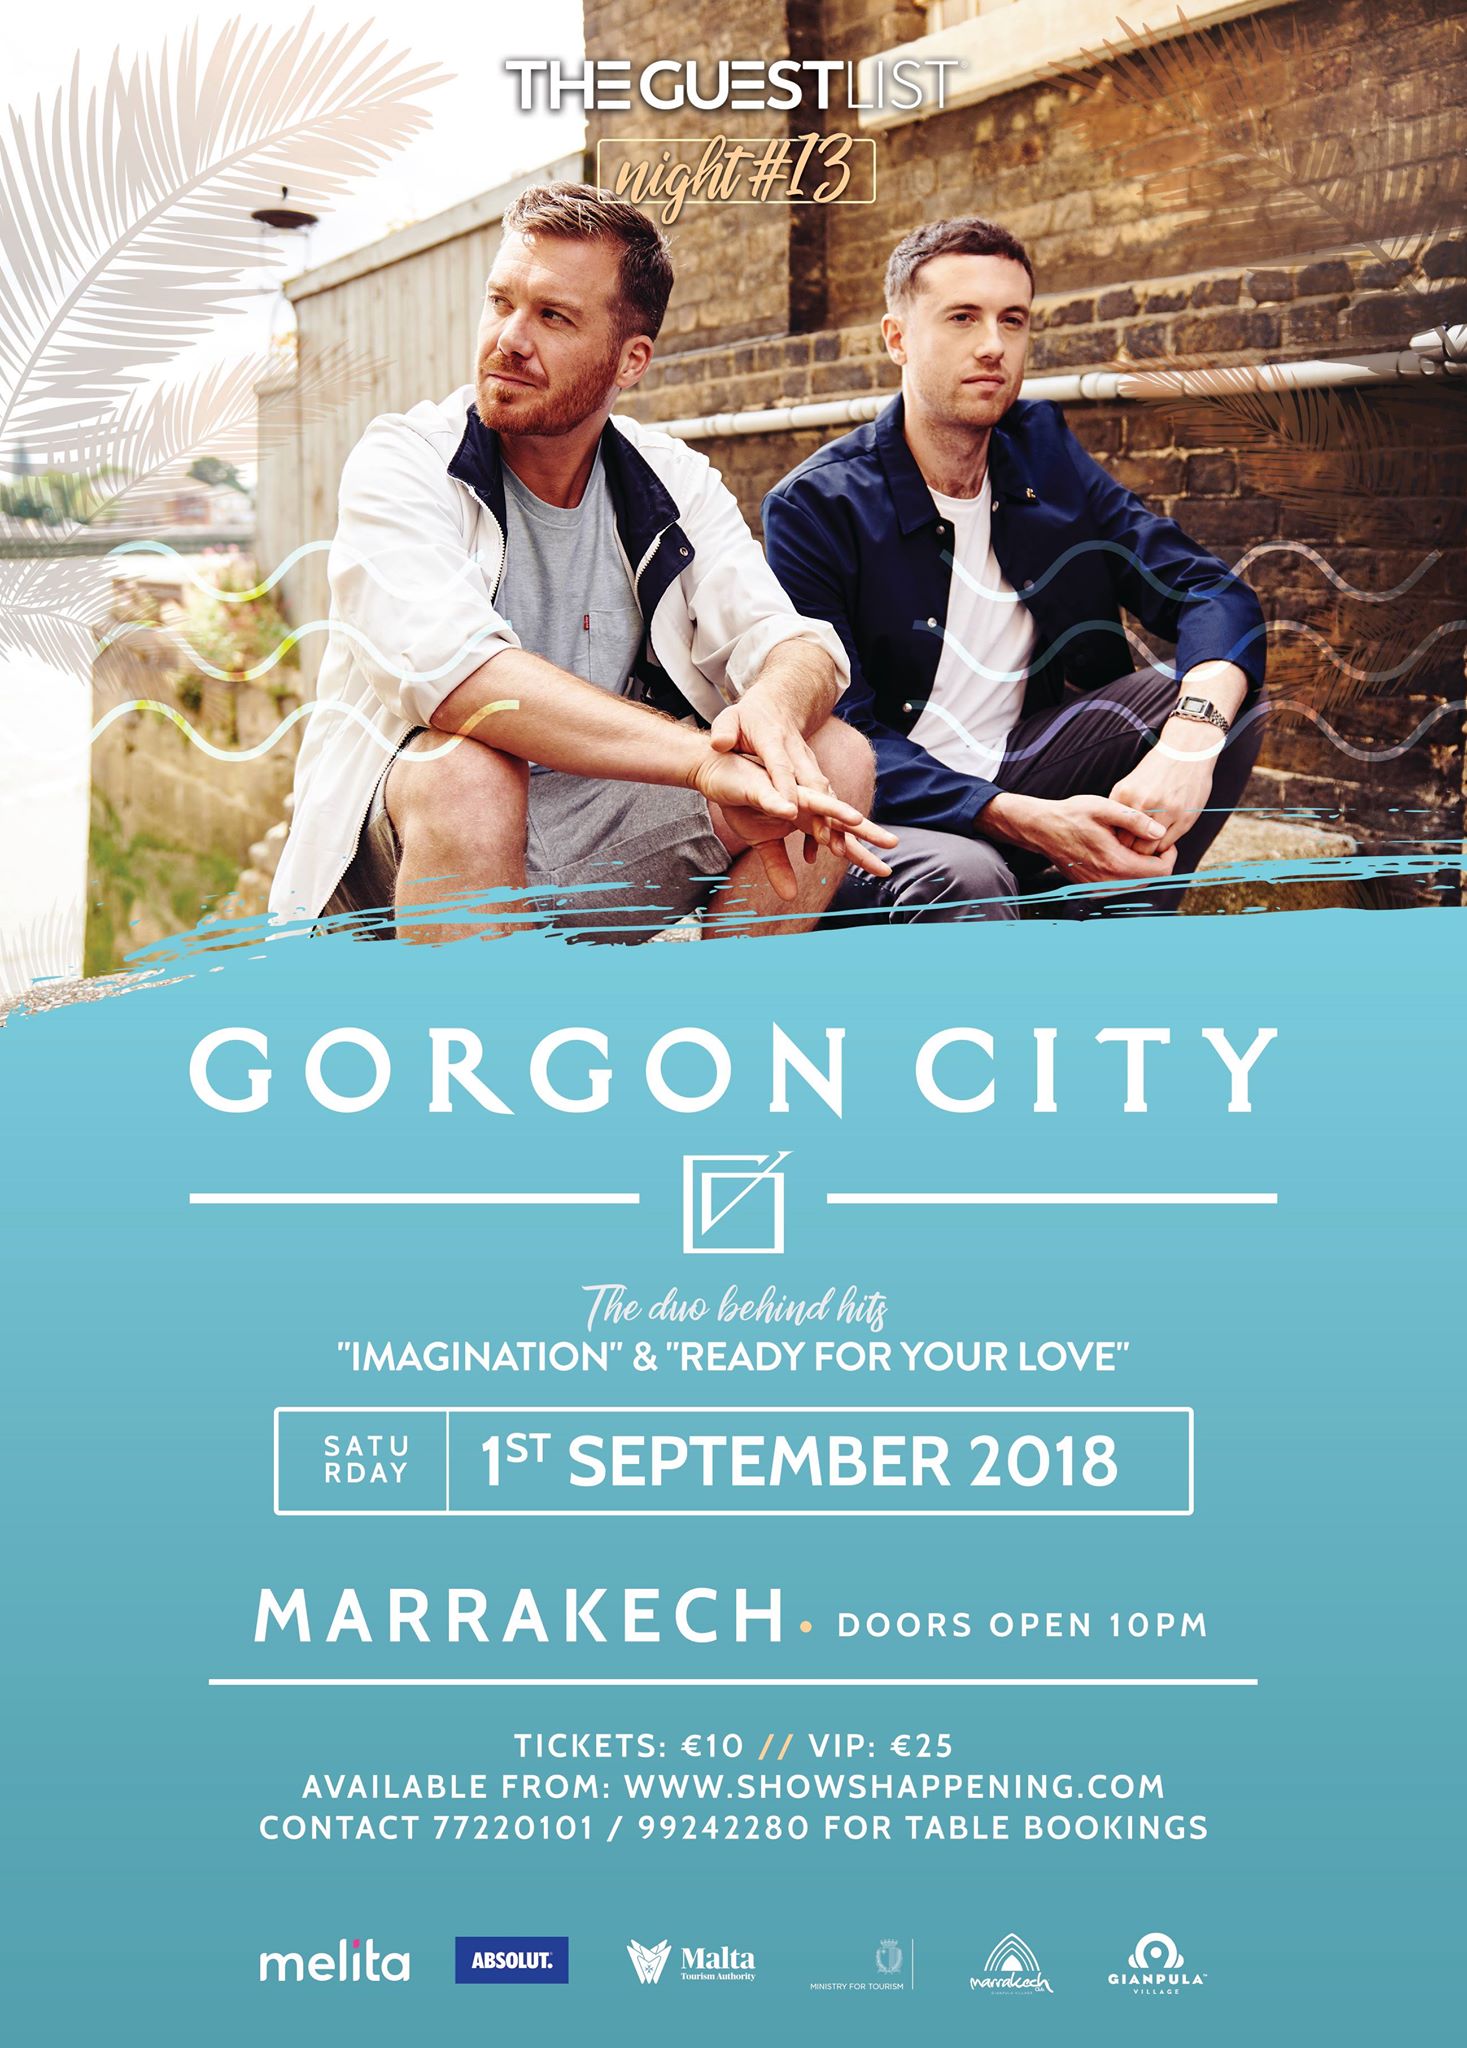 The Guestlist Presents: Gorgon CIty poster